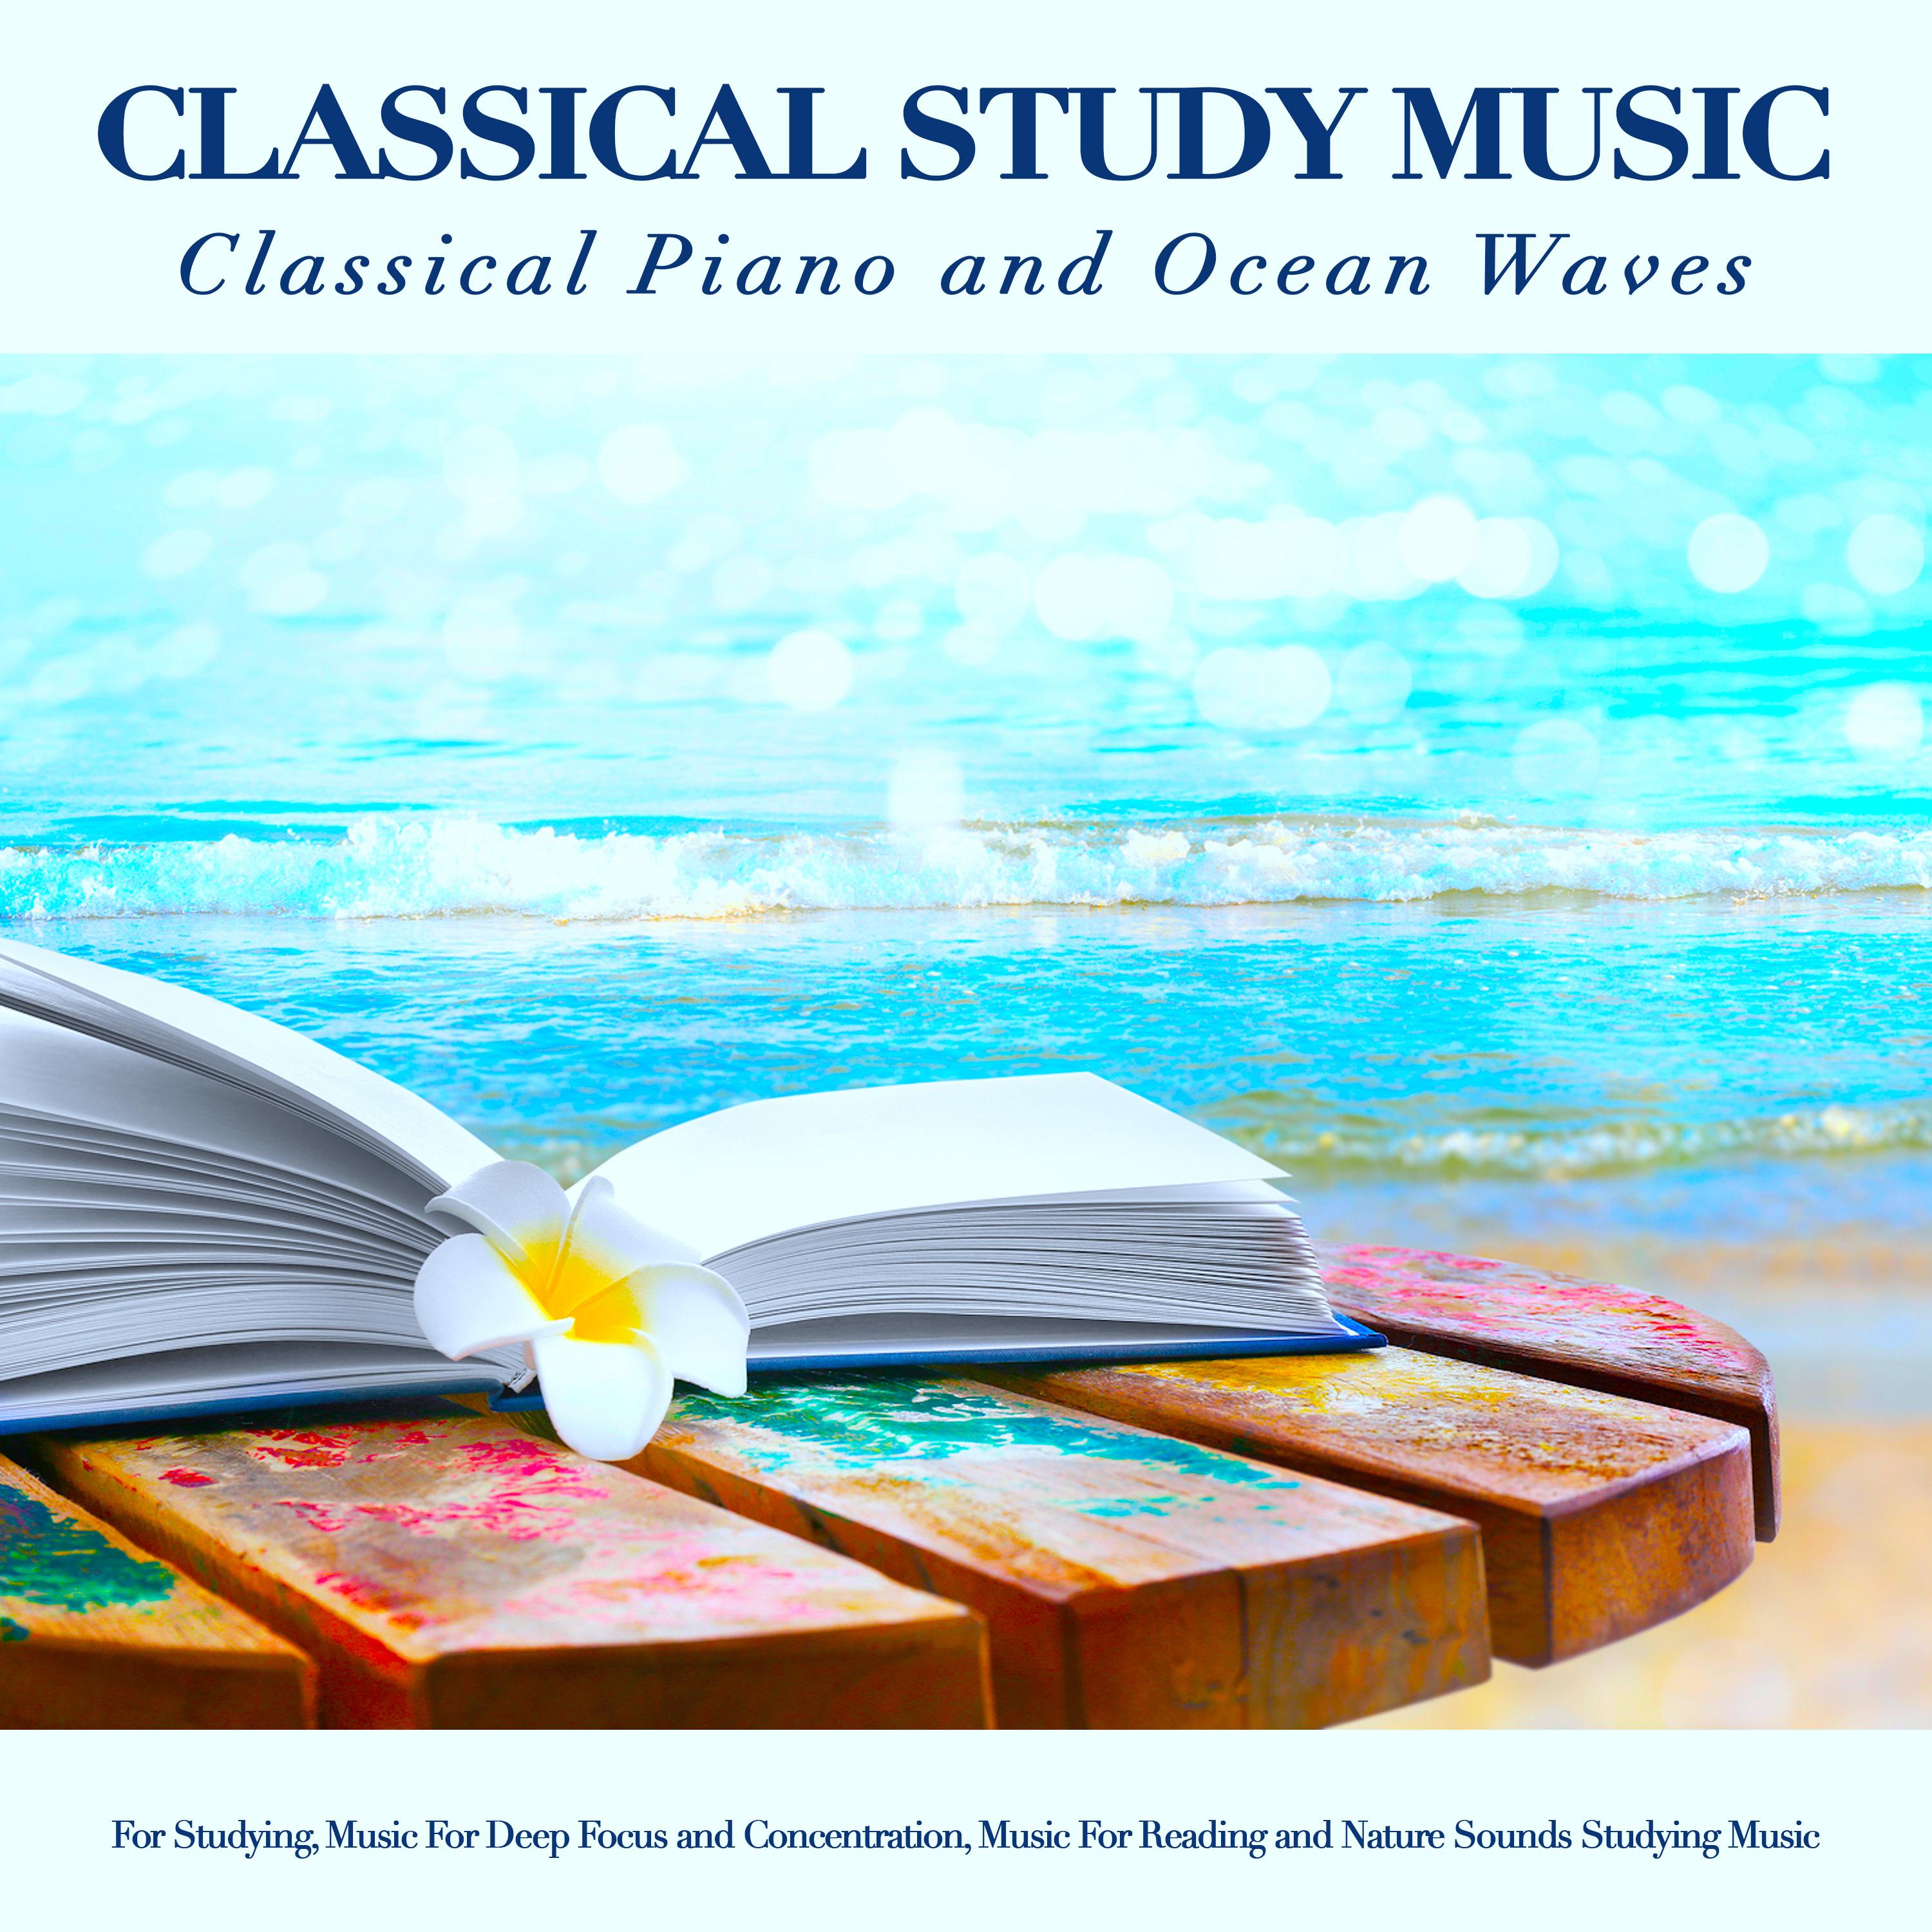 Claire De Lune - Debussy - Classical Study Music - Ocean Waves Sounds - Classical Piano for Studying